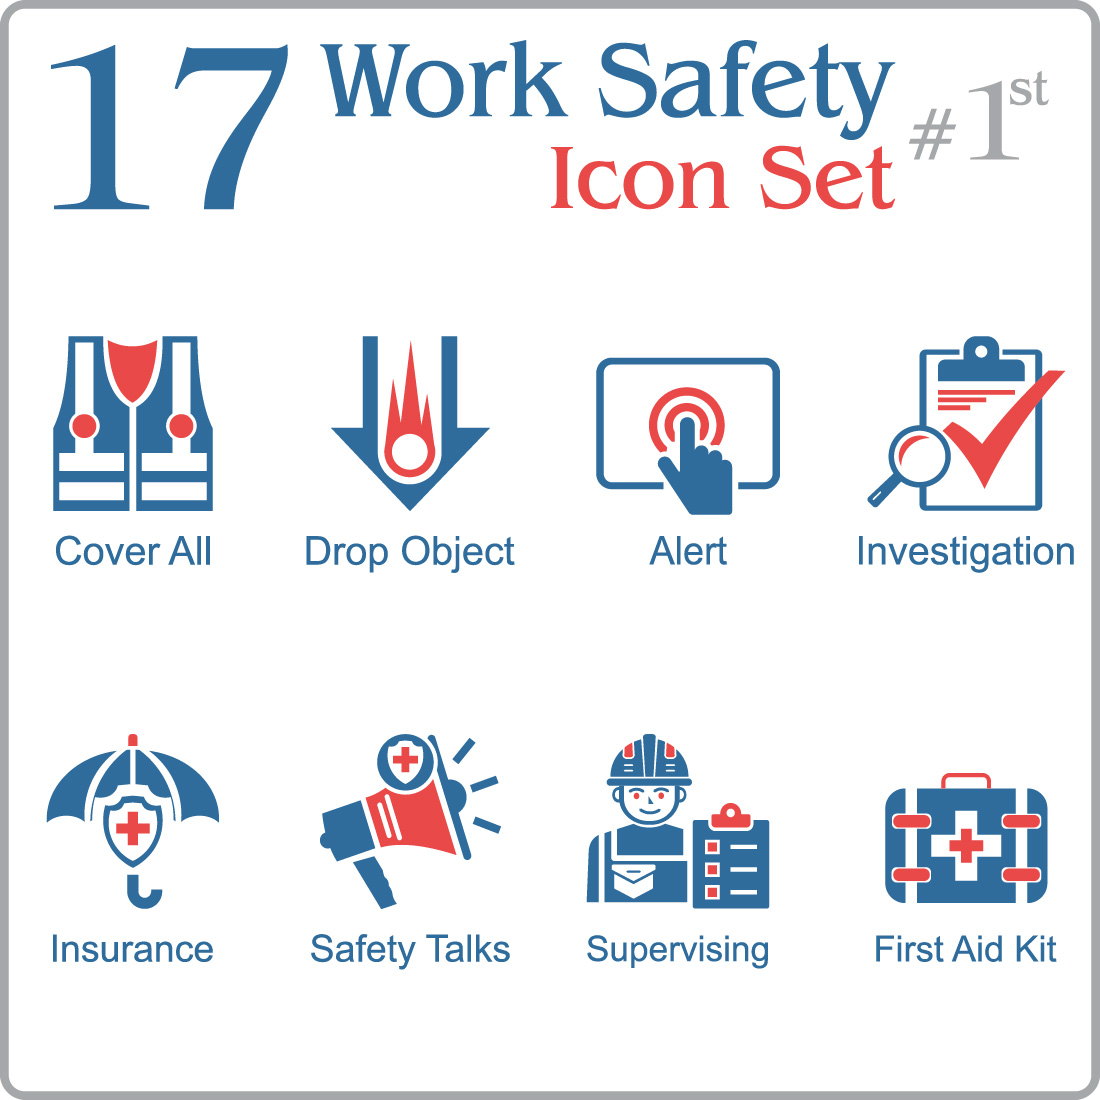 Work Safety Icon Design cover image.